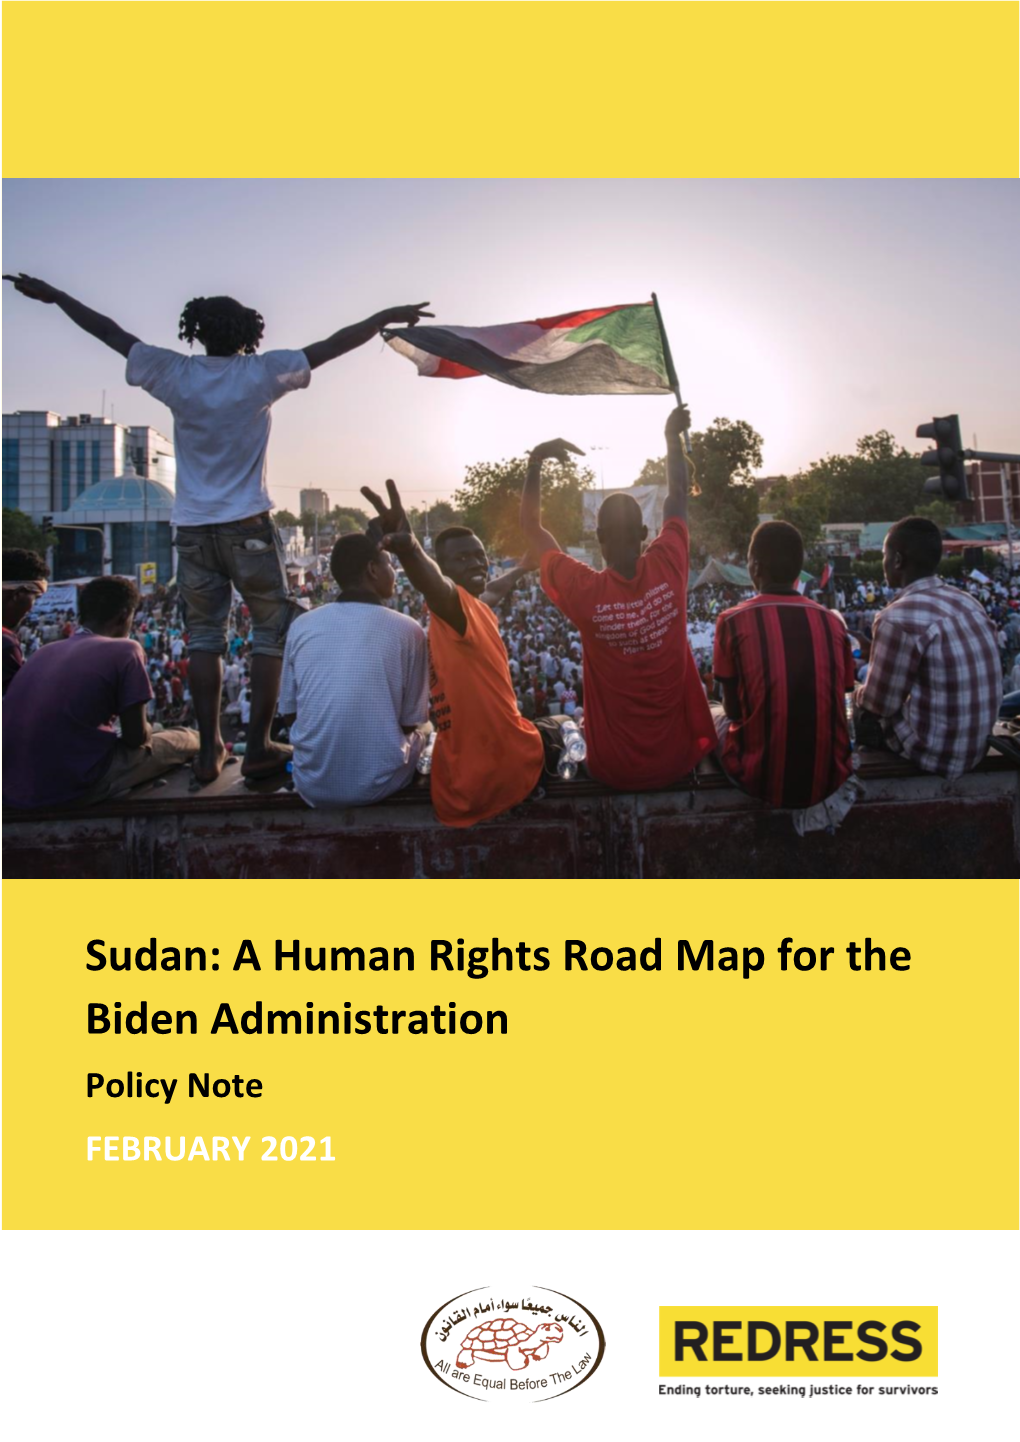 Sudan: a Human Rights Road Map for the Biden Administration Policy Note FEBRUARY 2021